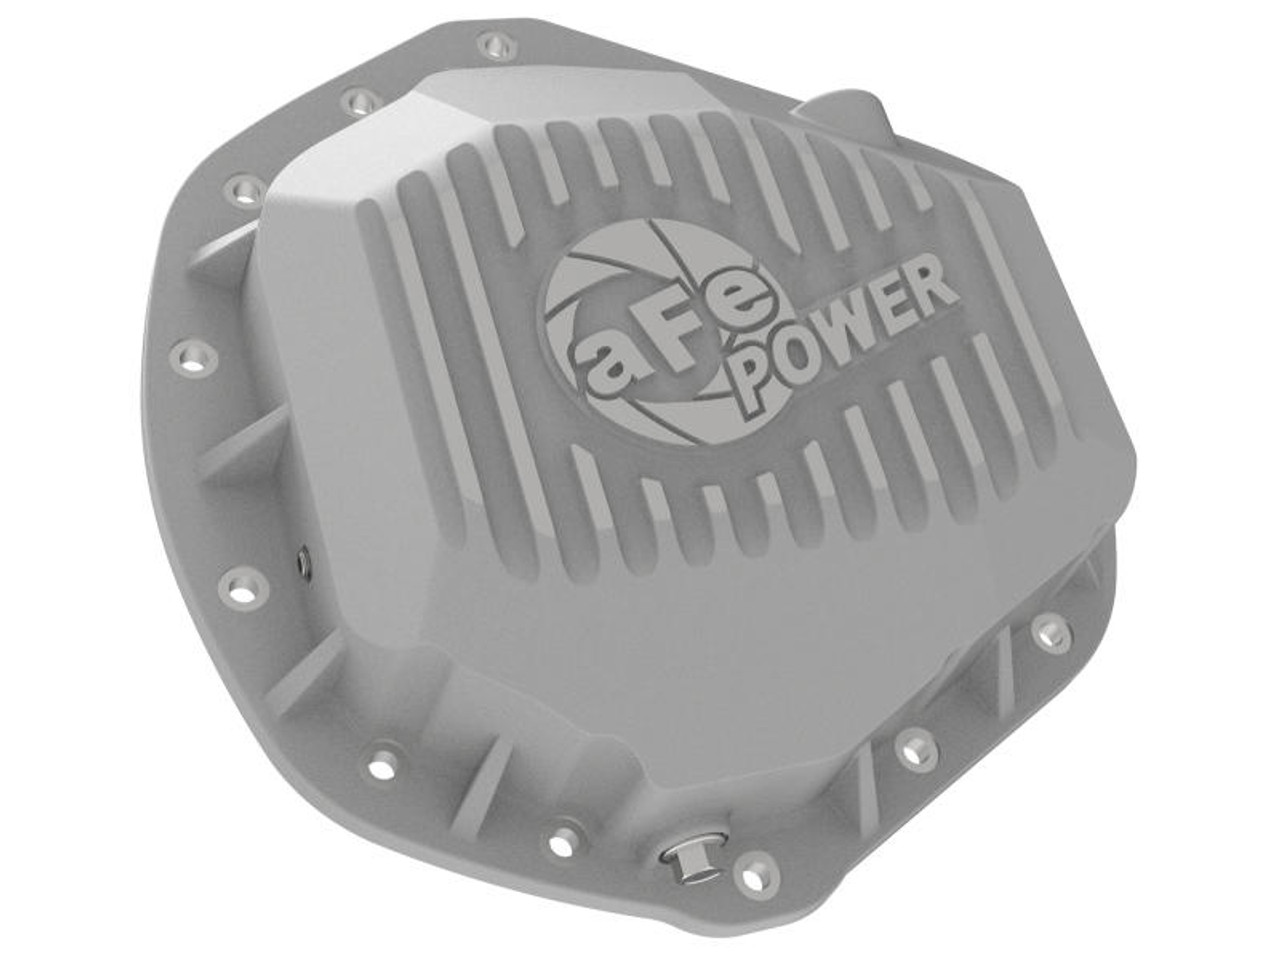 AFE aFe Power Pro Series Rear Differential Cover Raw w/ Machined Fins 14-18 Dodge Ram 2500/3500 - 46-70390